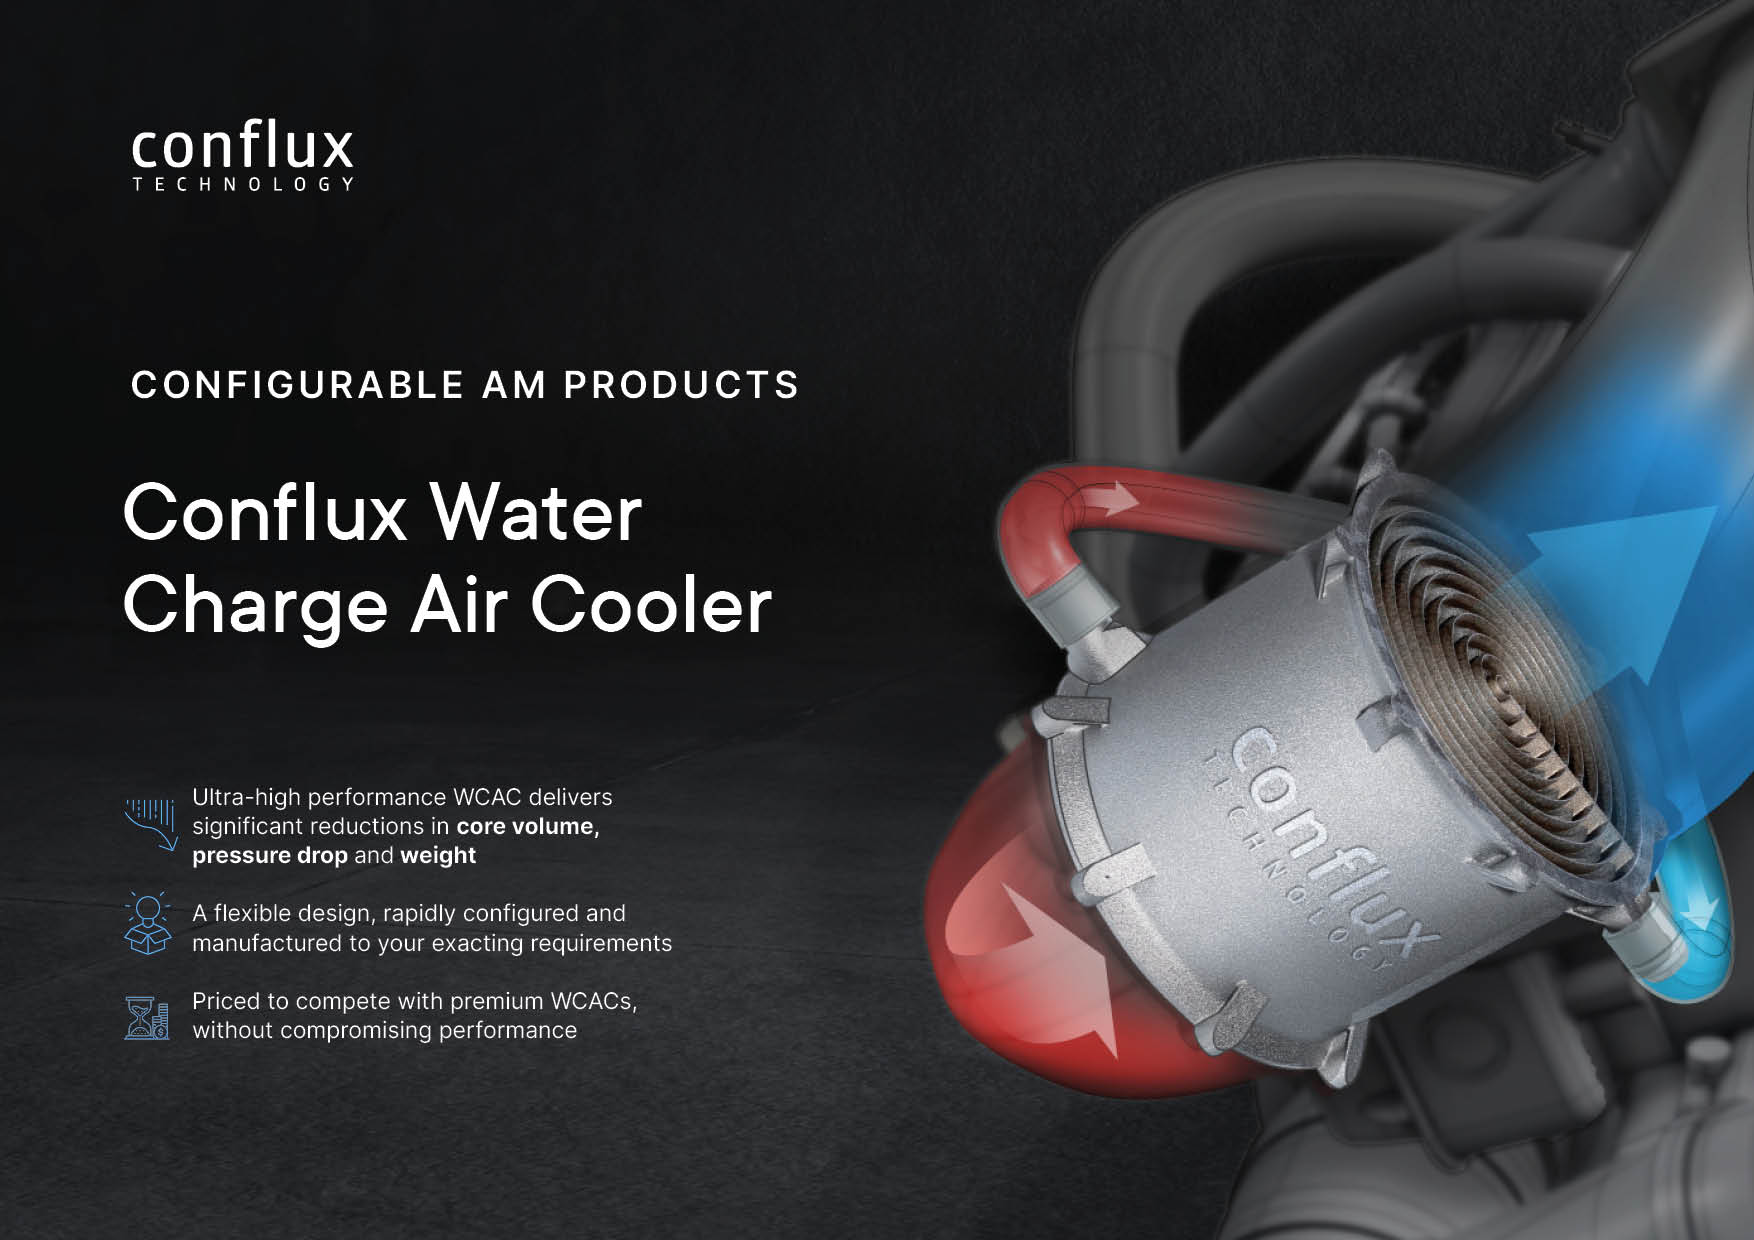 Case Study: Conflux Water Charge Air Cooler